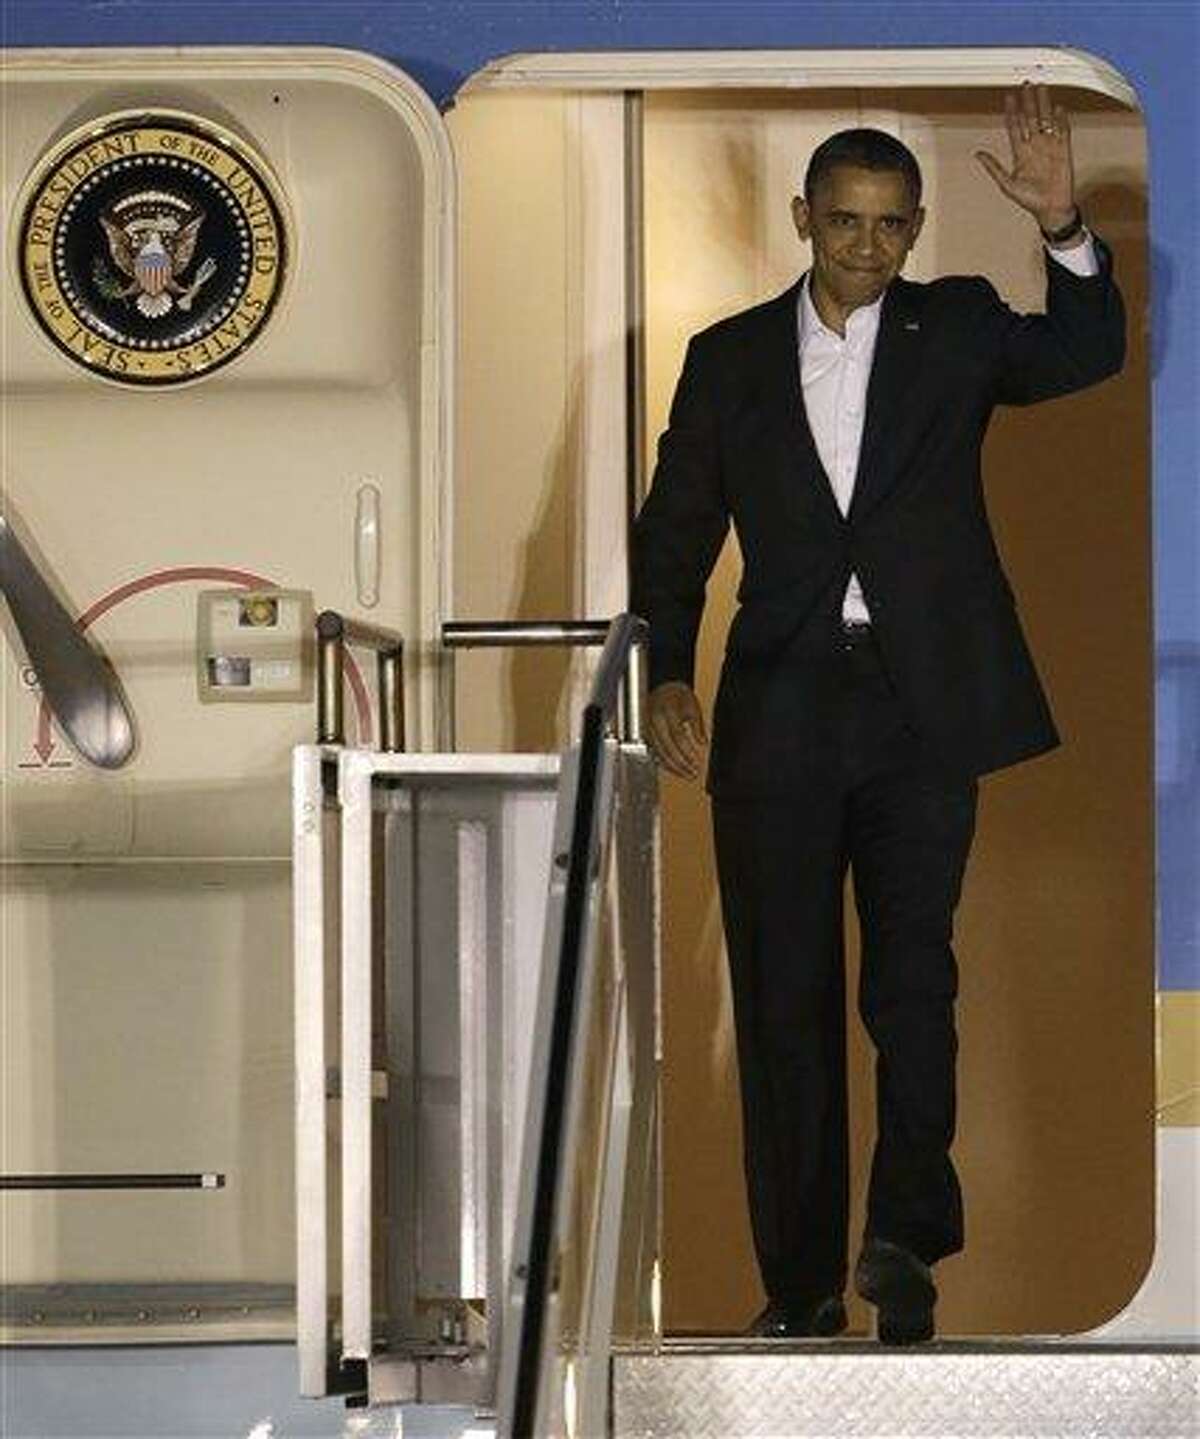 President Barack Obama waves as he walks down the stairs of Air Force One upon his arrival at Palm Beach International Airport. AP Photo/Wilfredo Lee